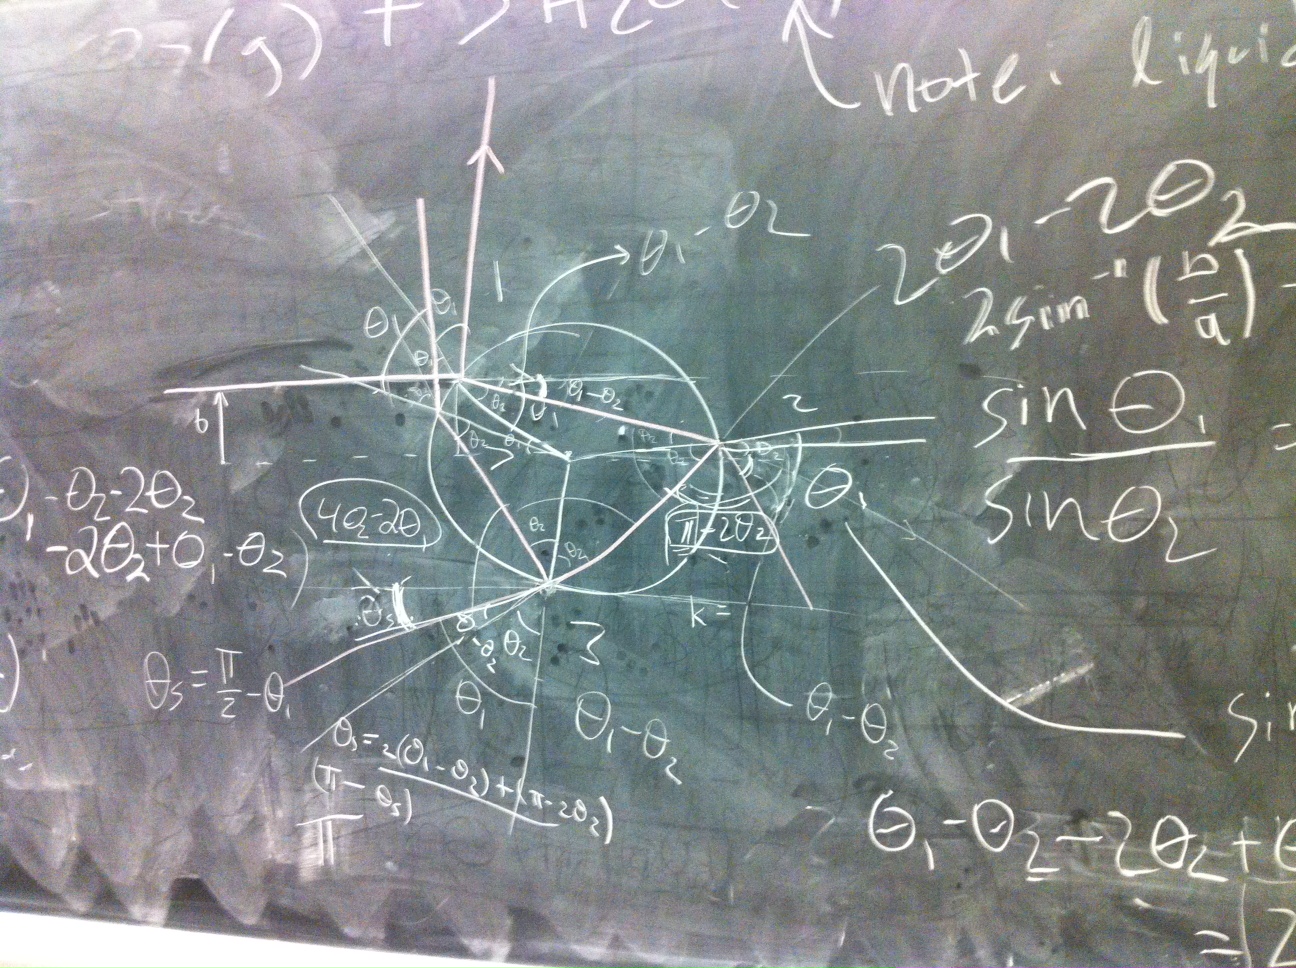 A blackboard with drawings and equations